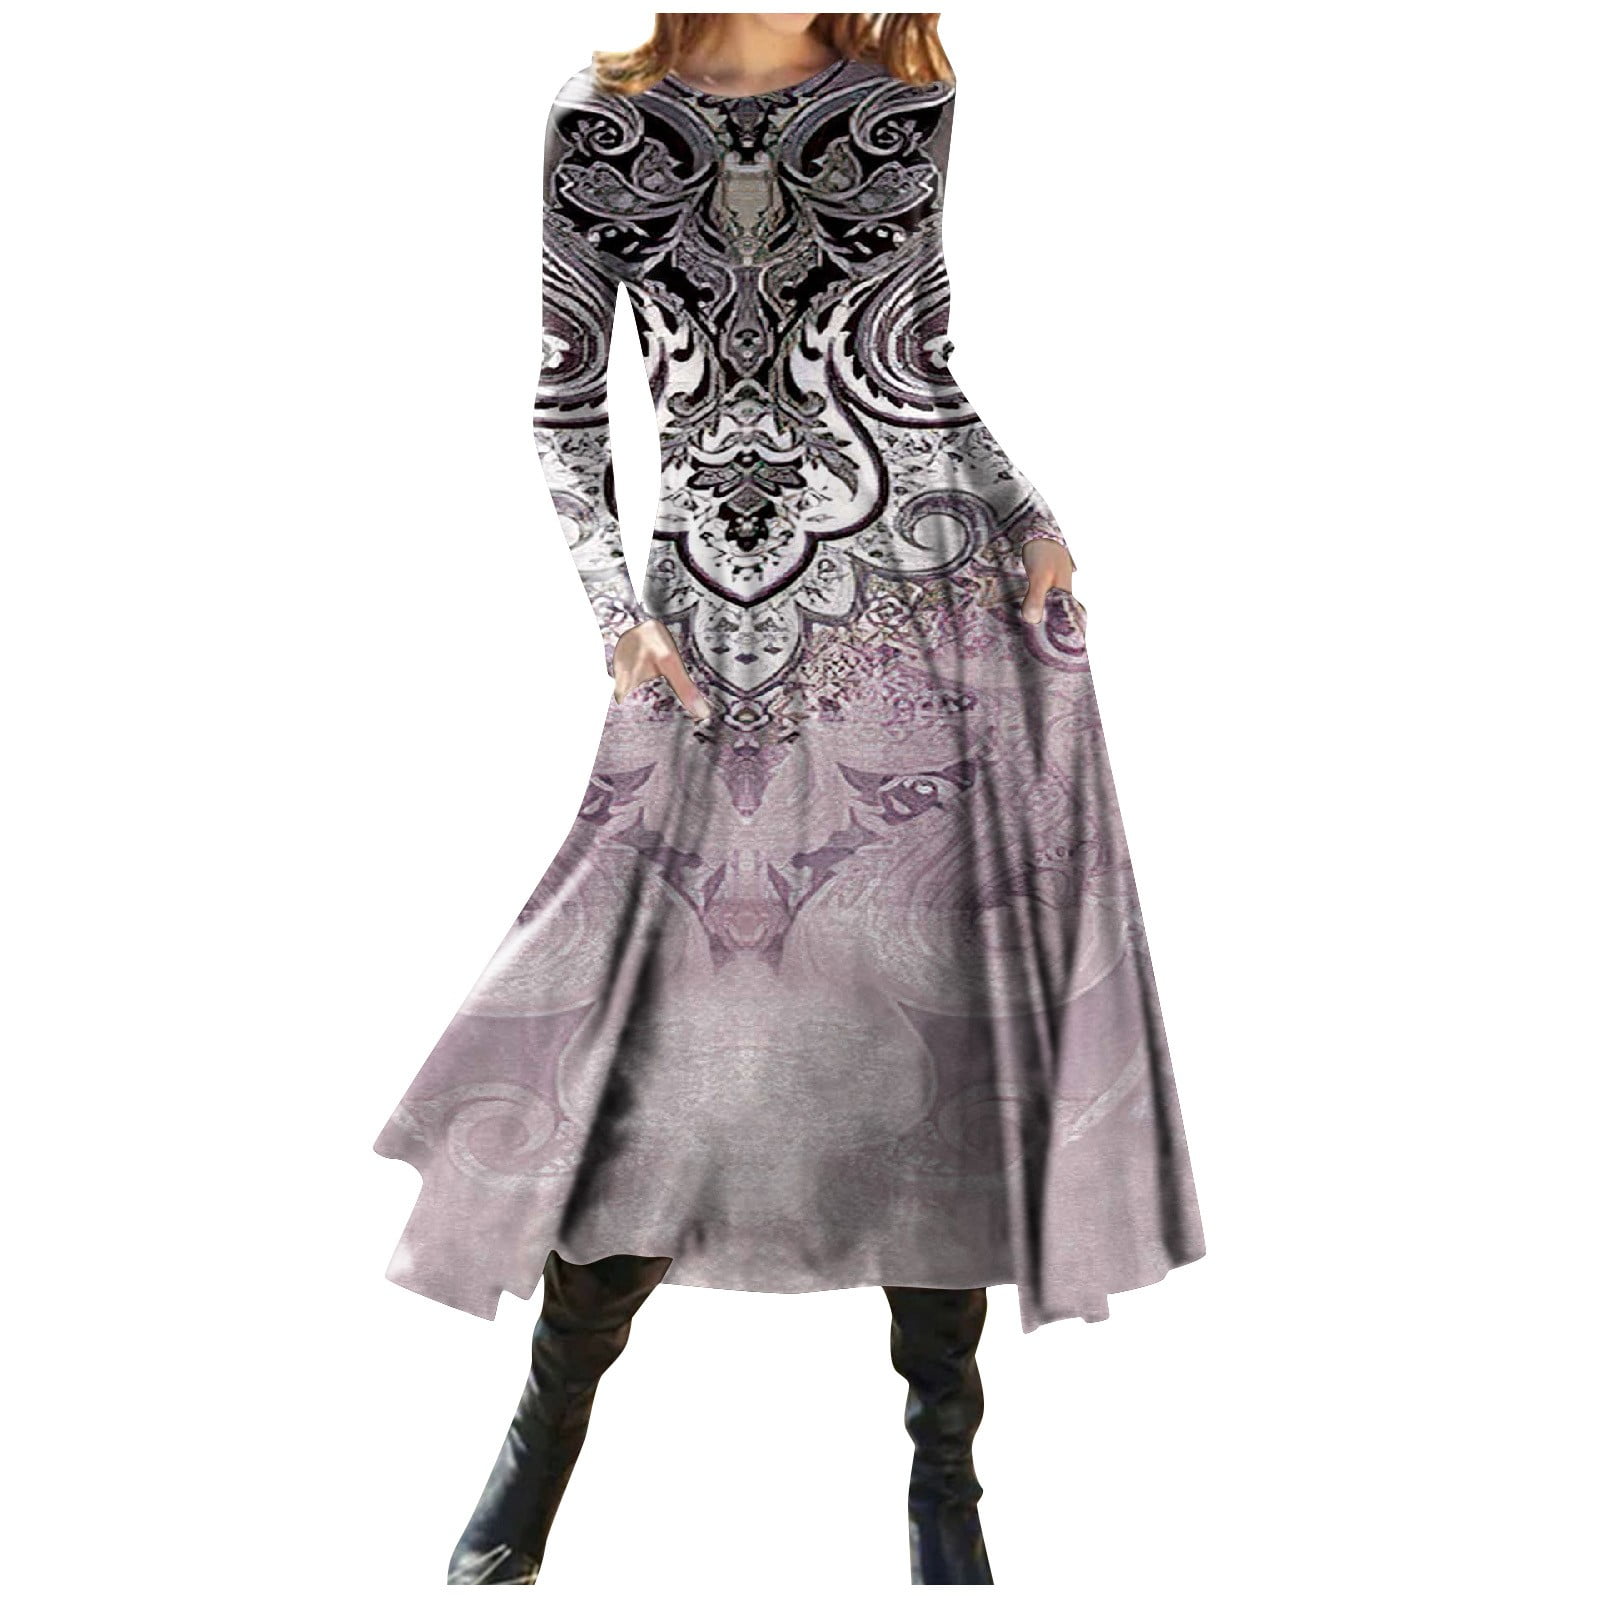 SXAURA Women's Floral Print Round Neck Long Sleeve Fitted Midi Dress ...